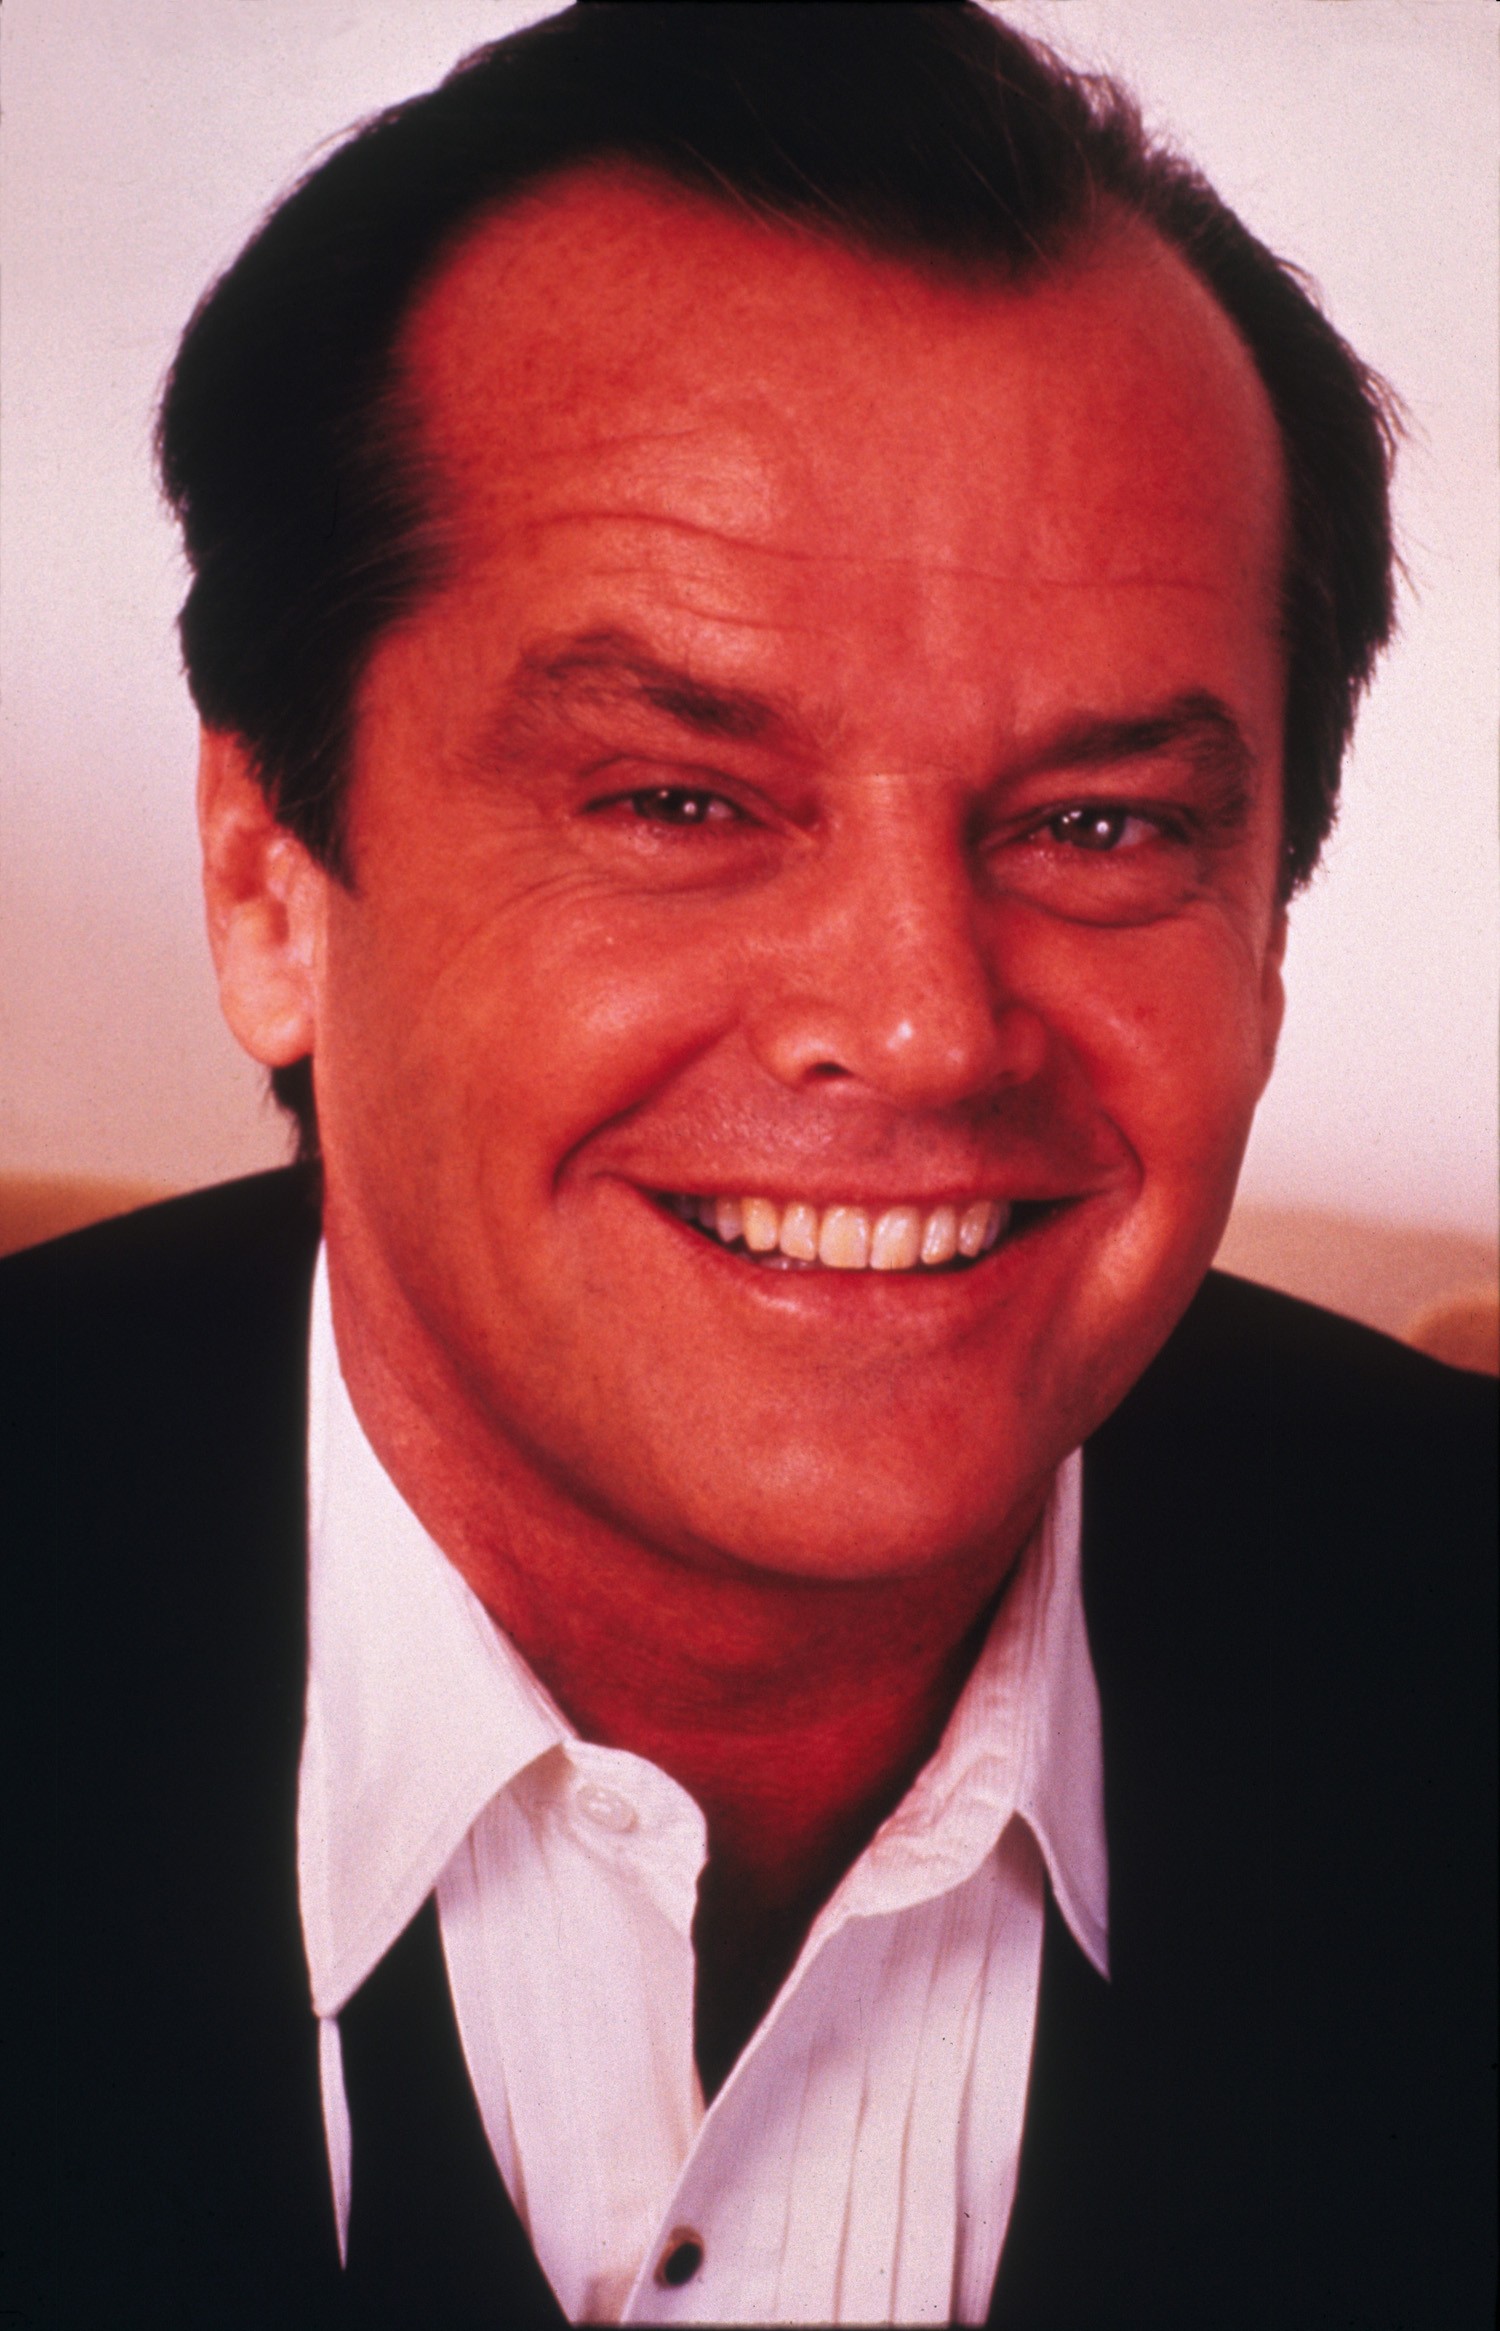 nick-nicholson-actor-young